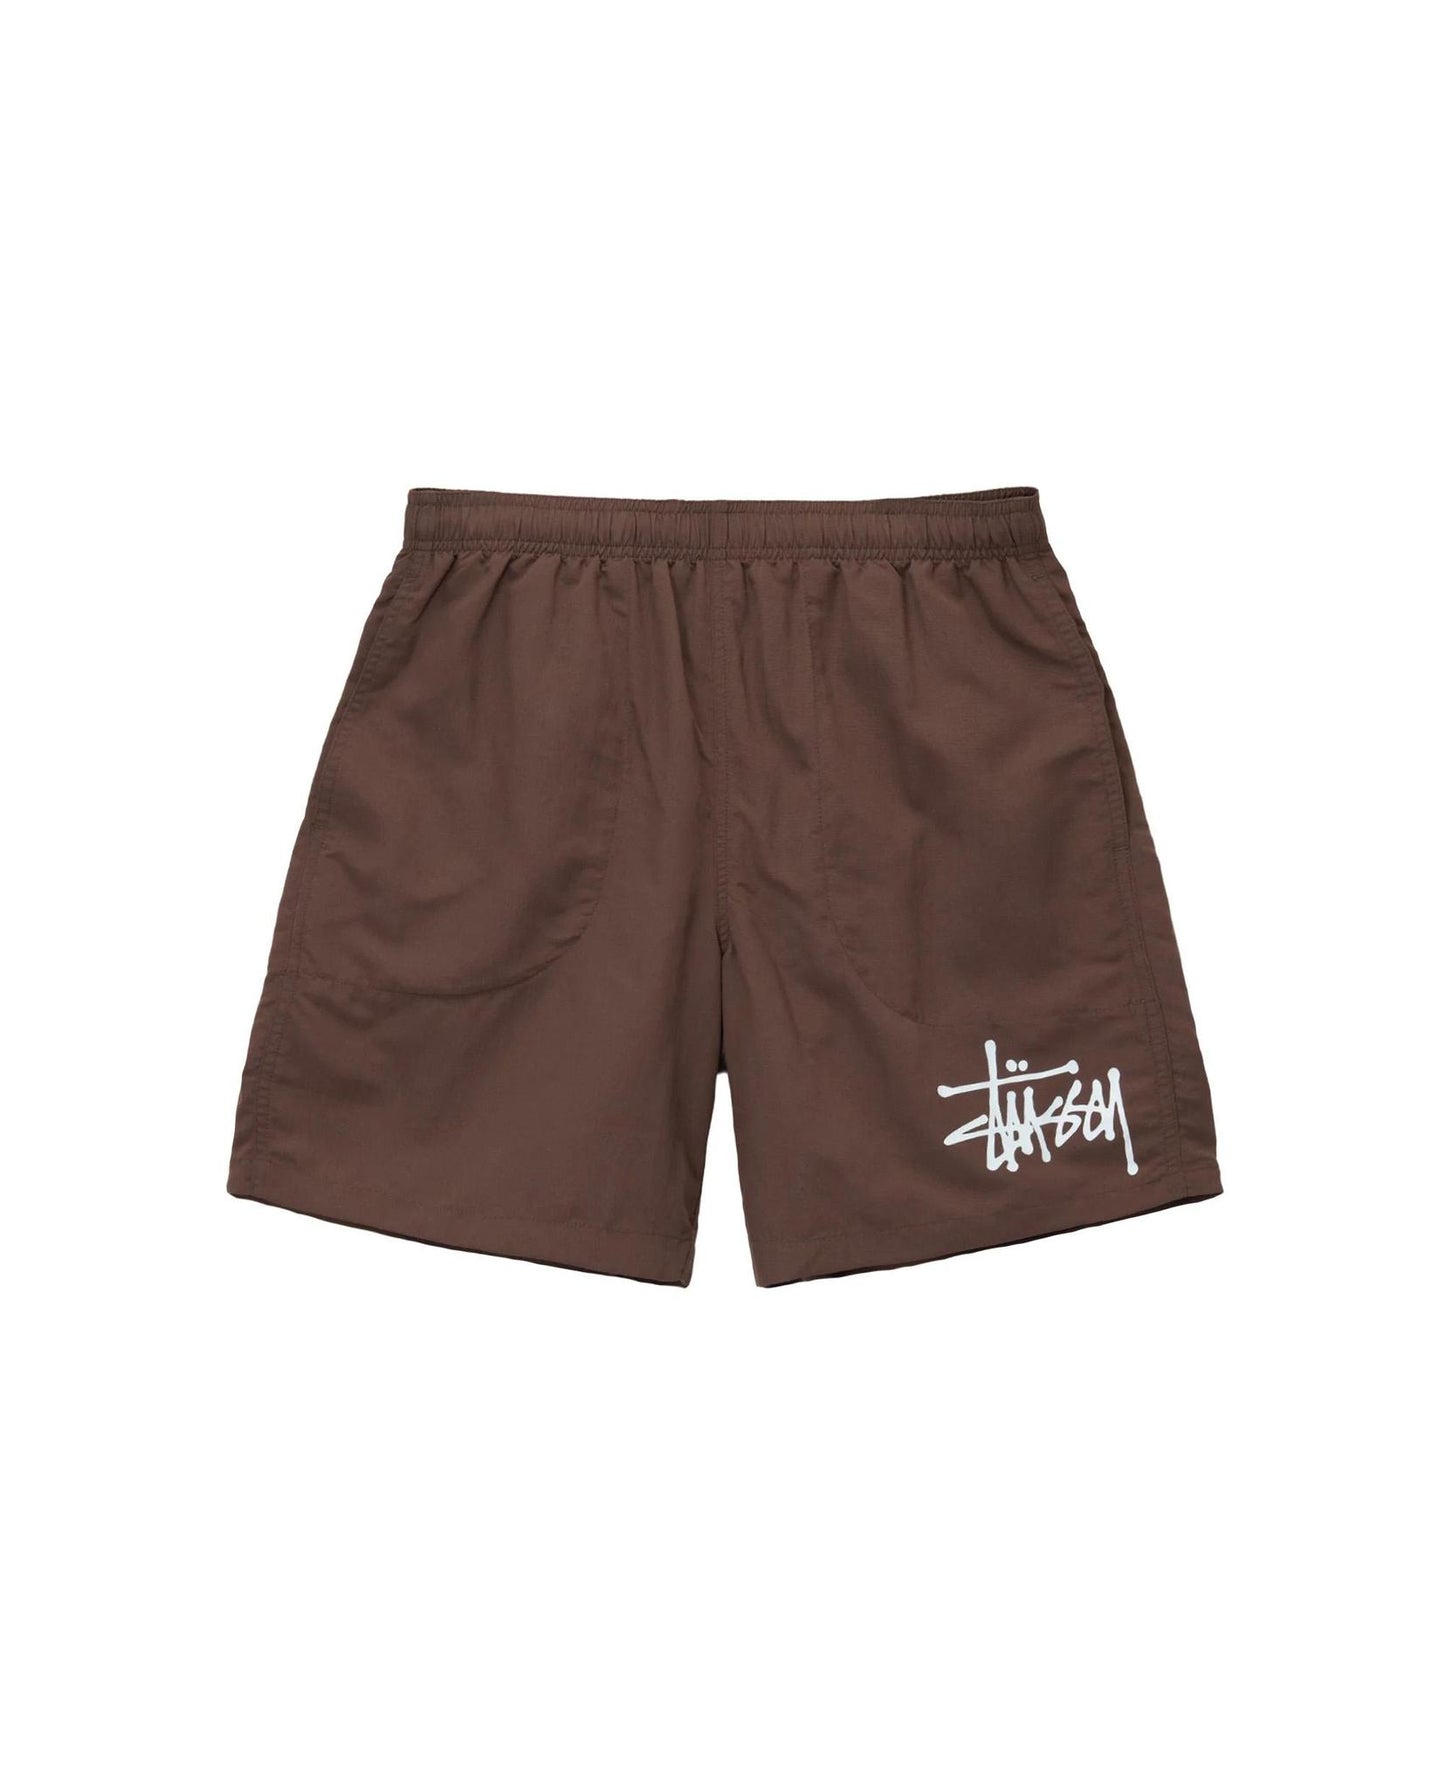 stussy shorts size M conds